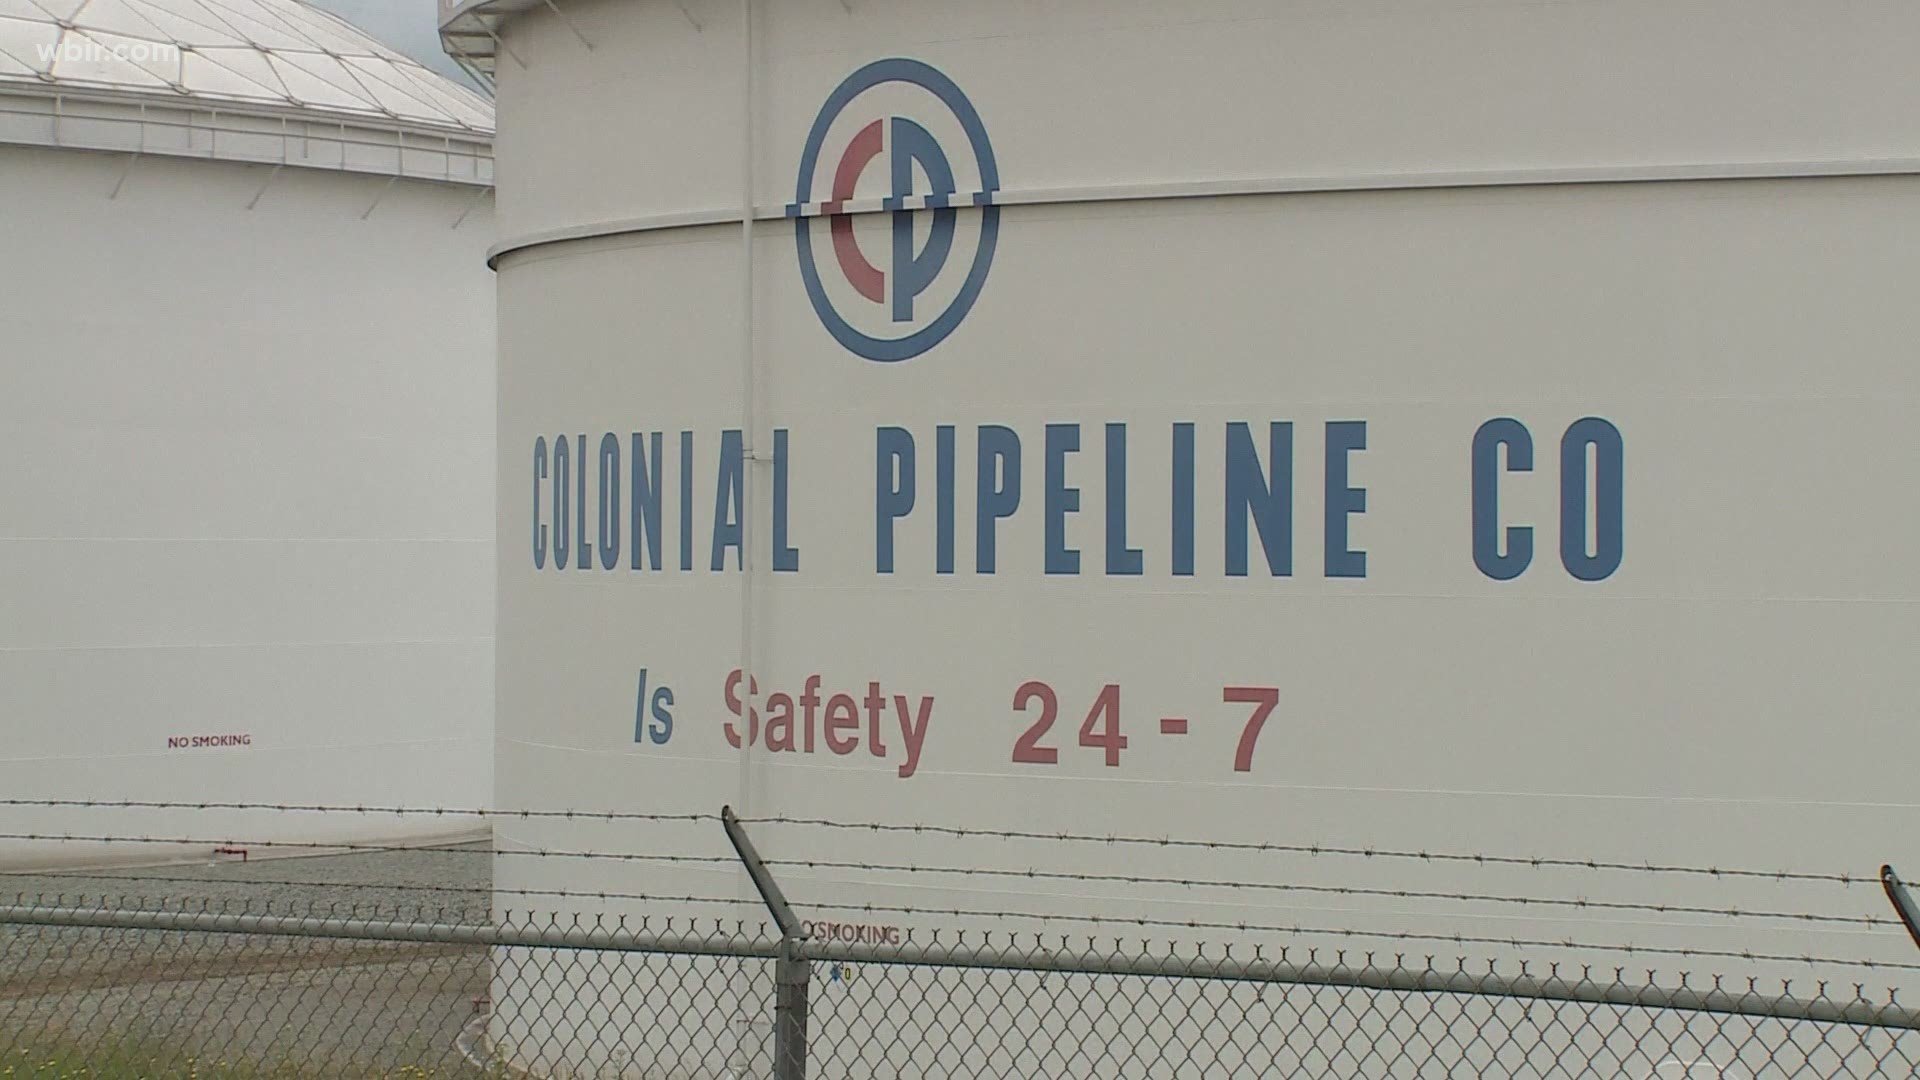 3 things you need to know about the Colonial Pipeline cyberattack